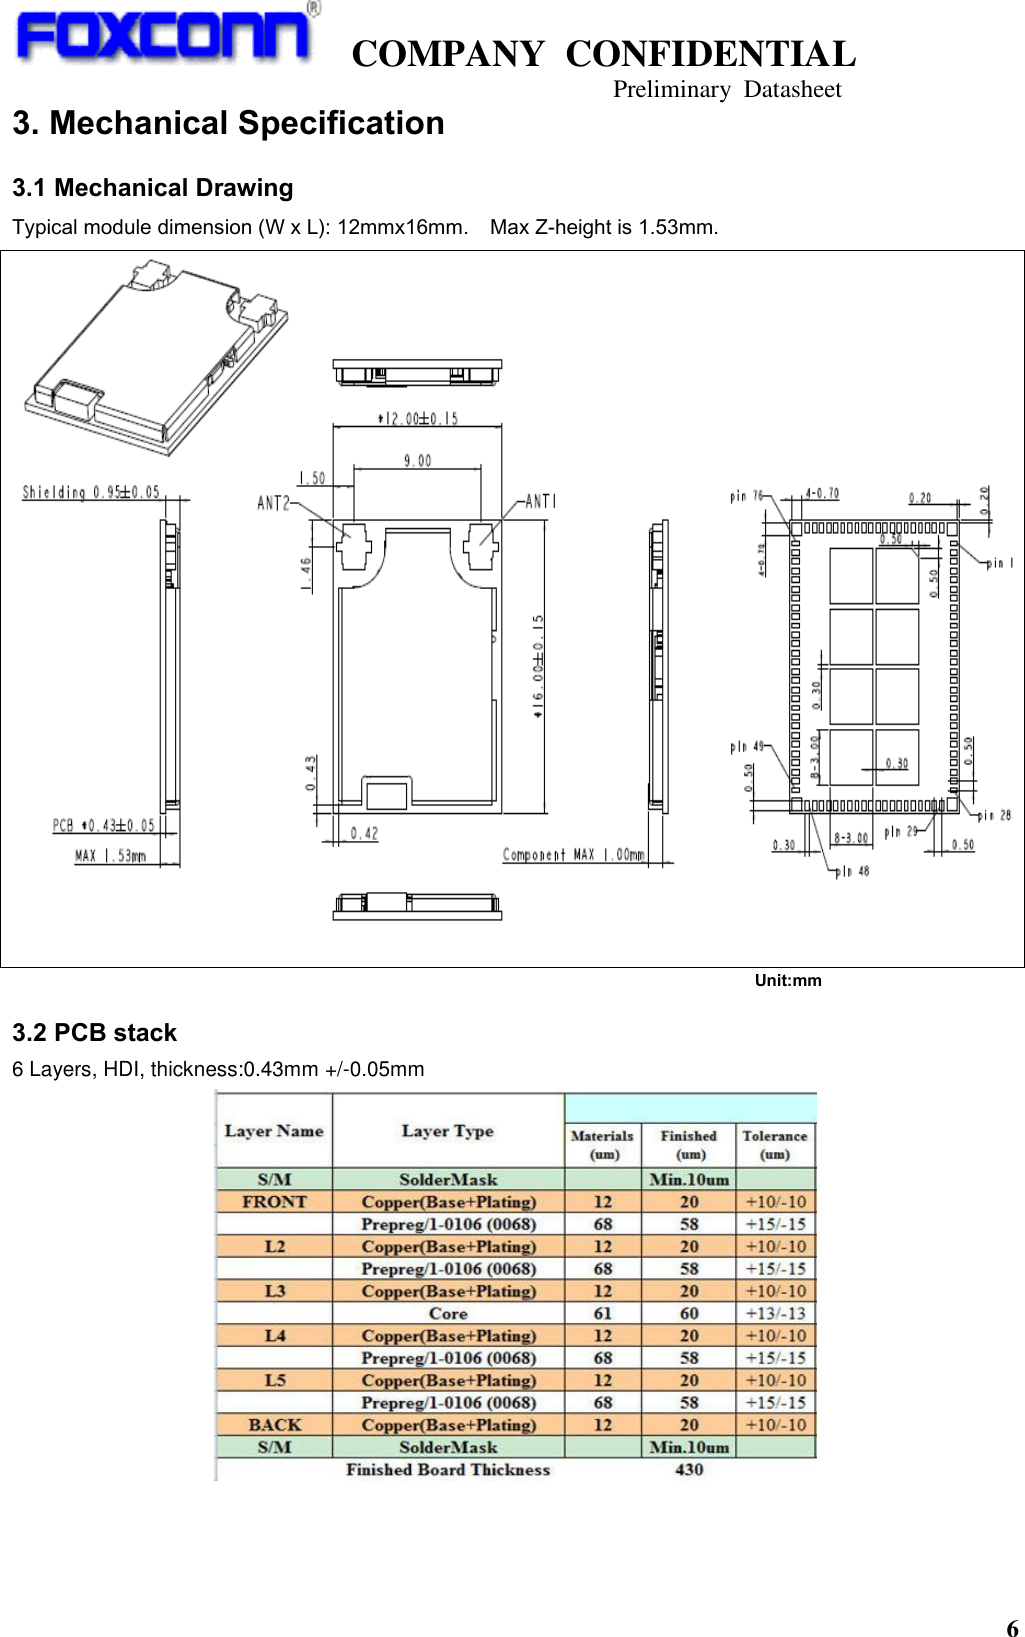   COMPANY  CONFIDENTIAL                                   Preliminary  Datasheet 6  3. Mechanical Specification 3.1 Mechanical Drawing Typical module dimension (W x L): 12mmx16mm.    Max Z-height is 1.53mm.                                                                              Unit:mm 3.2 PCB stack 6 Layers, HDI, thickness:0.43mm +/-0.05mm  